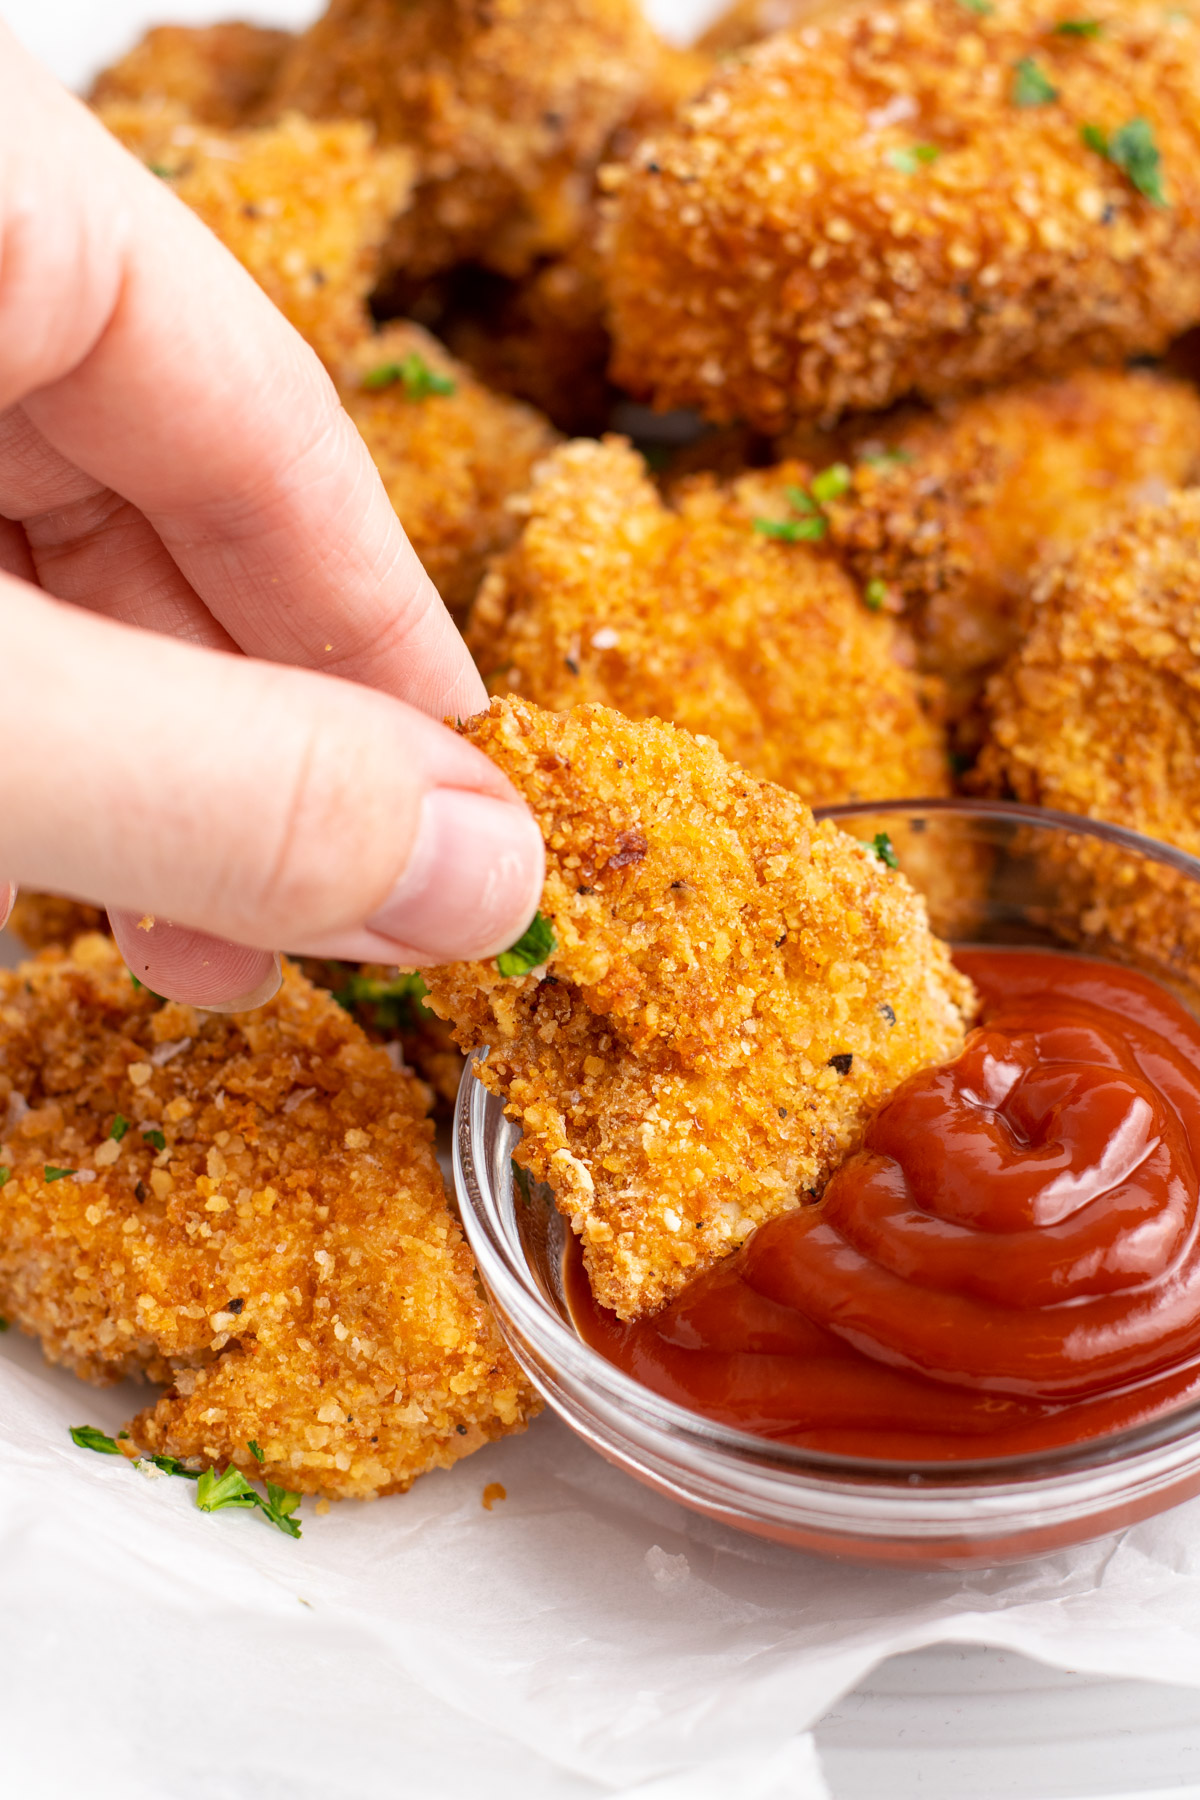 hand dipping a chicken nugget into ketchup.